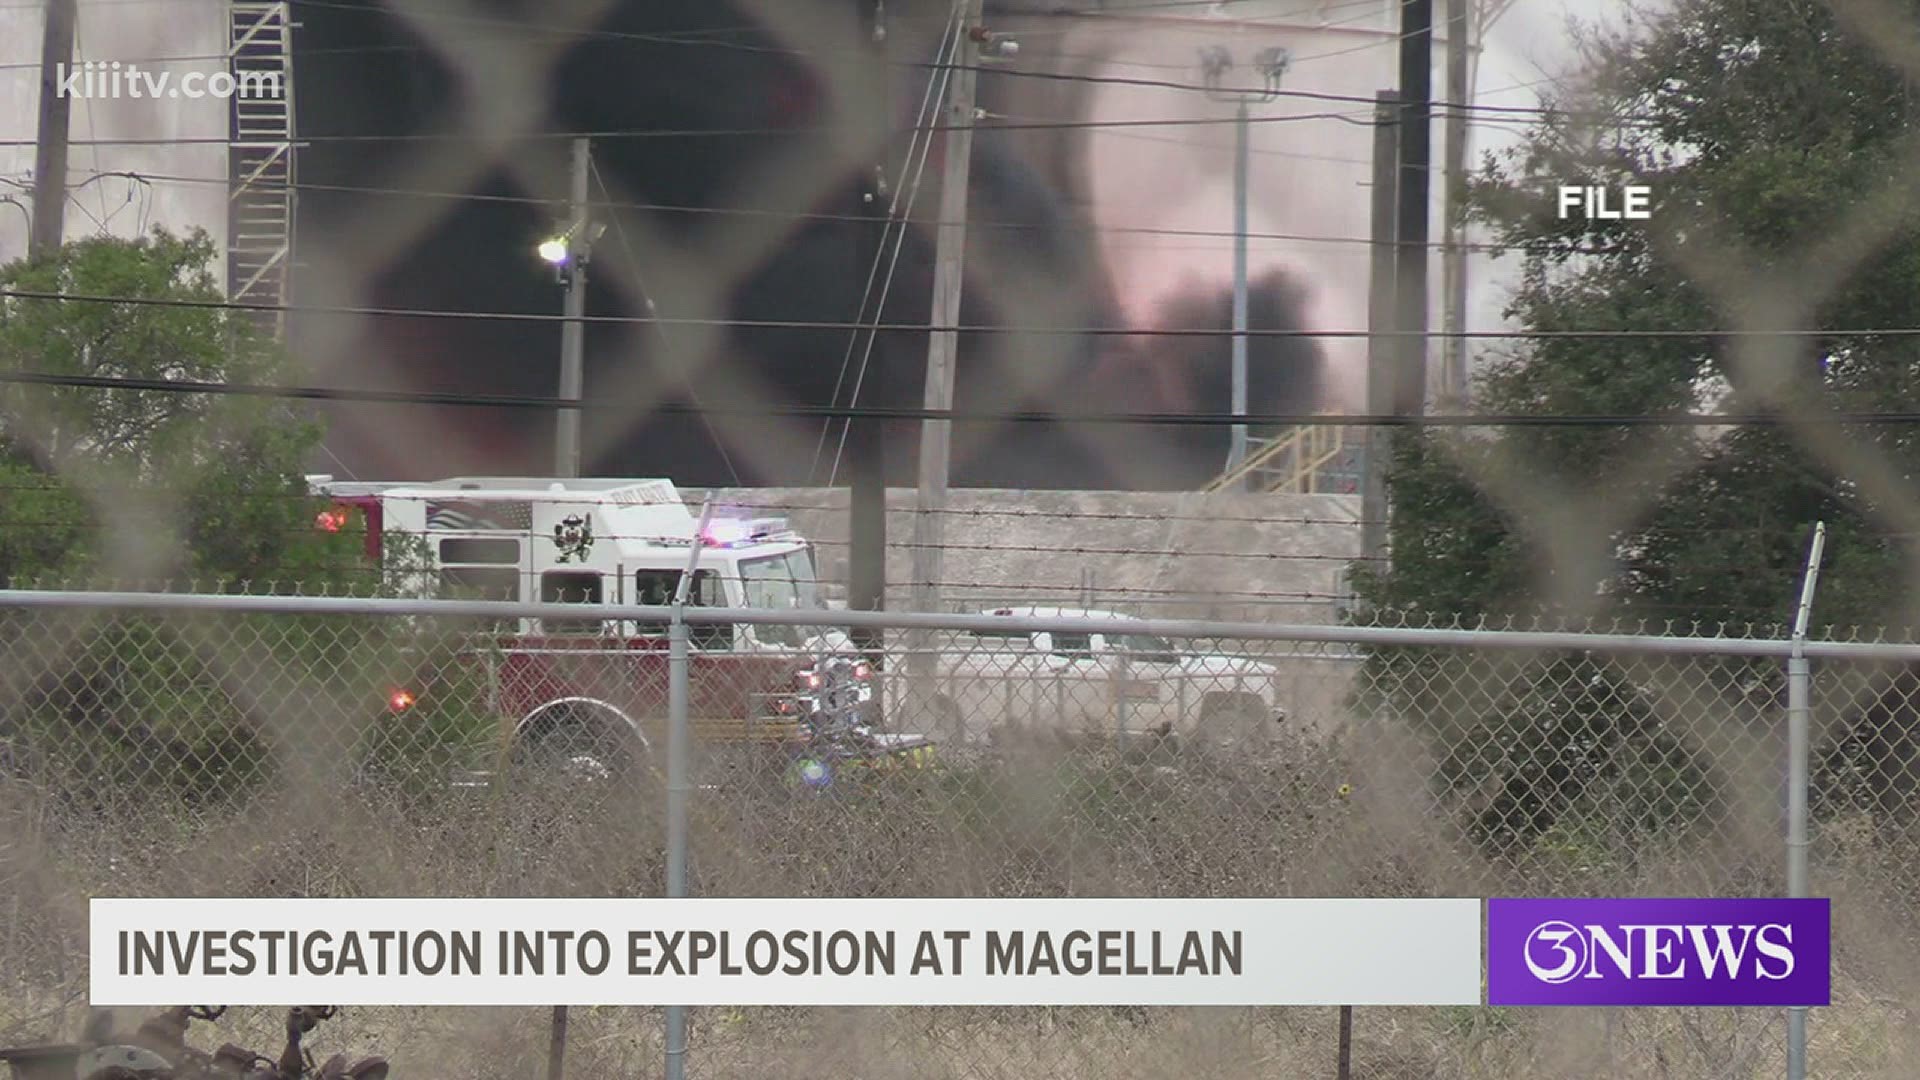 Officials with Magellan report that the fire started near an above ground tank holding light crude oil. It was being cleaned and inspected.